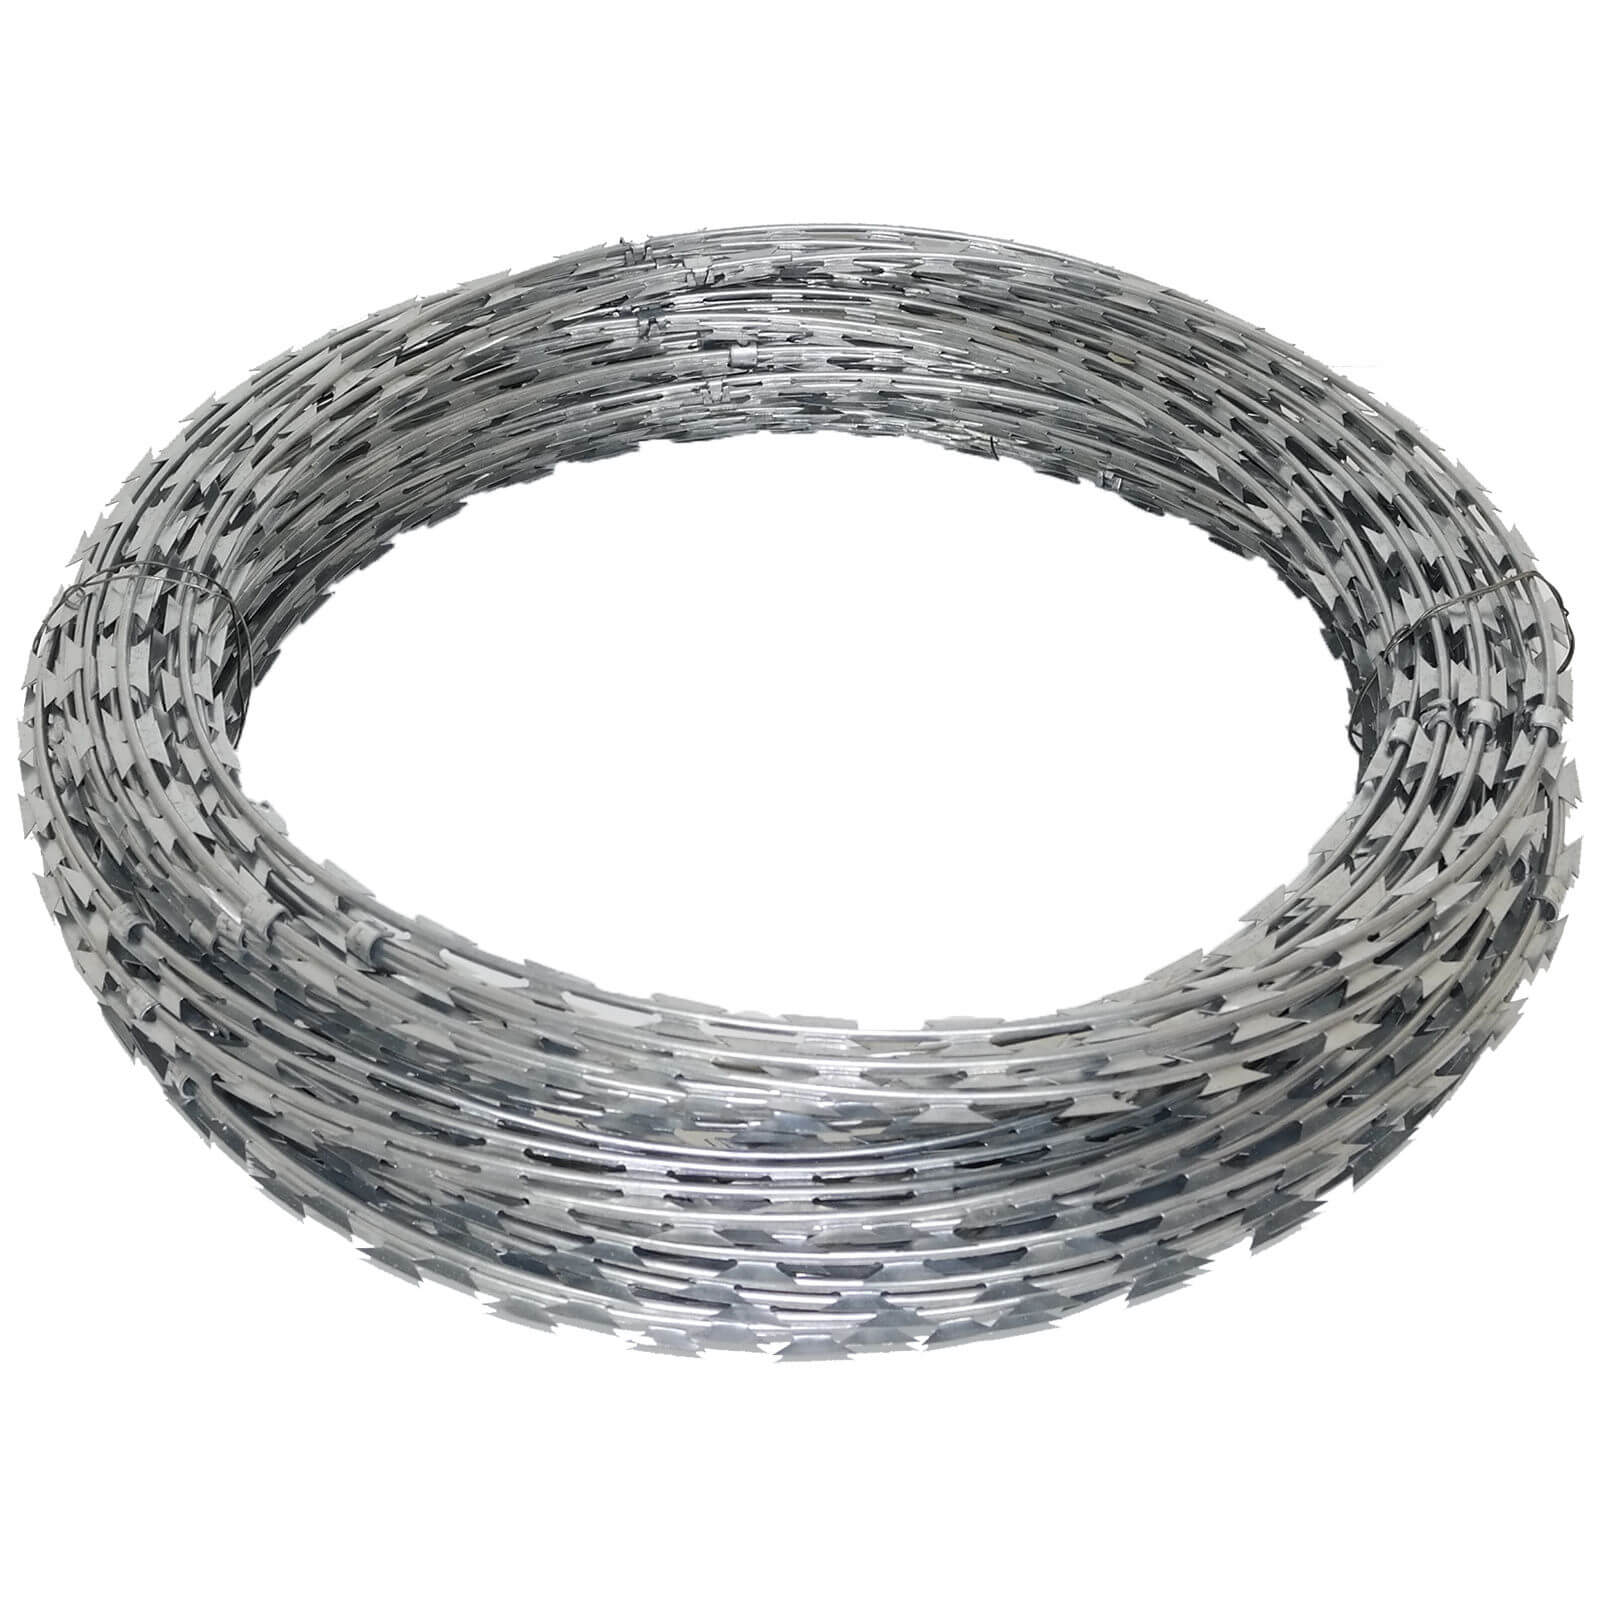 Keep your property secure with razor wire fencing